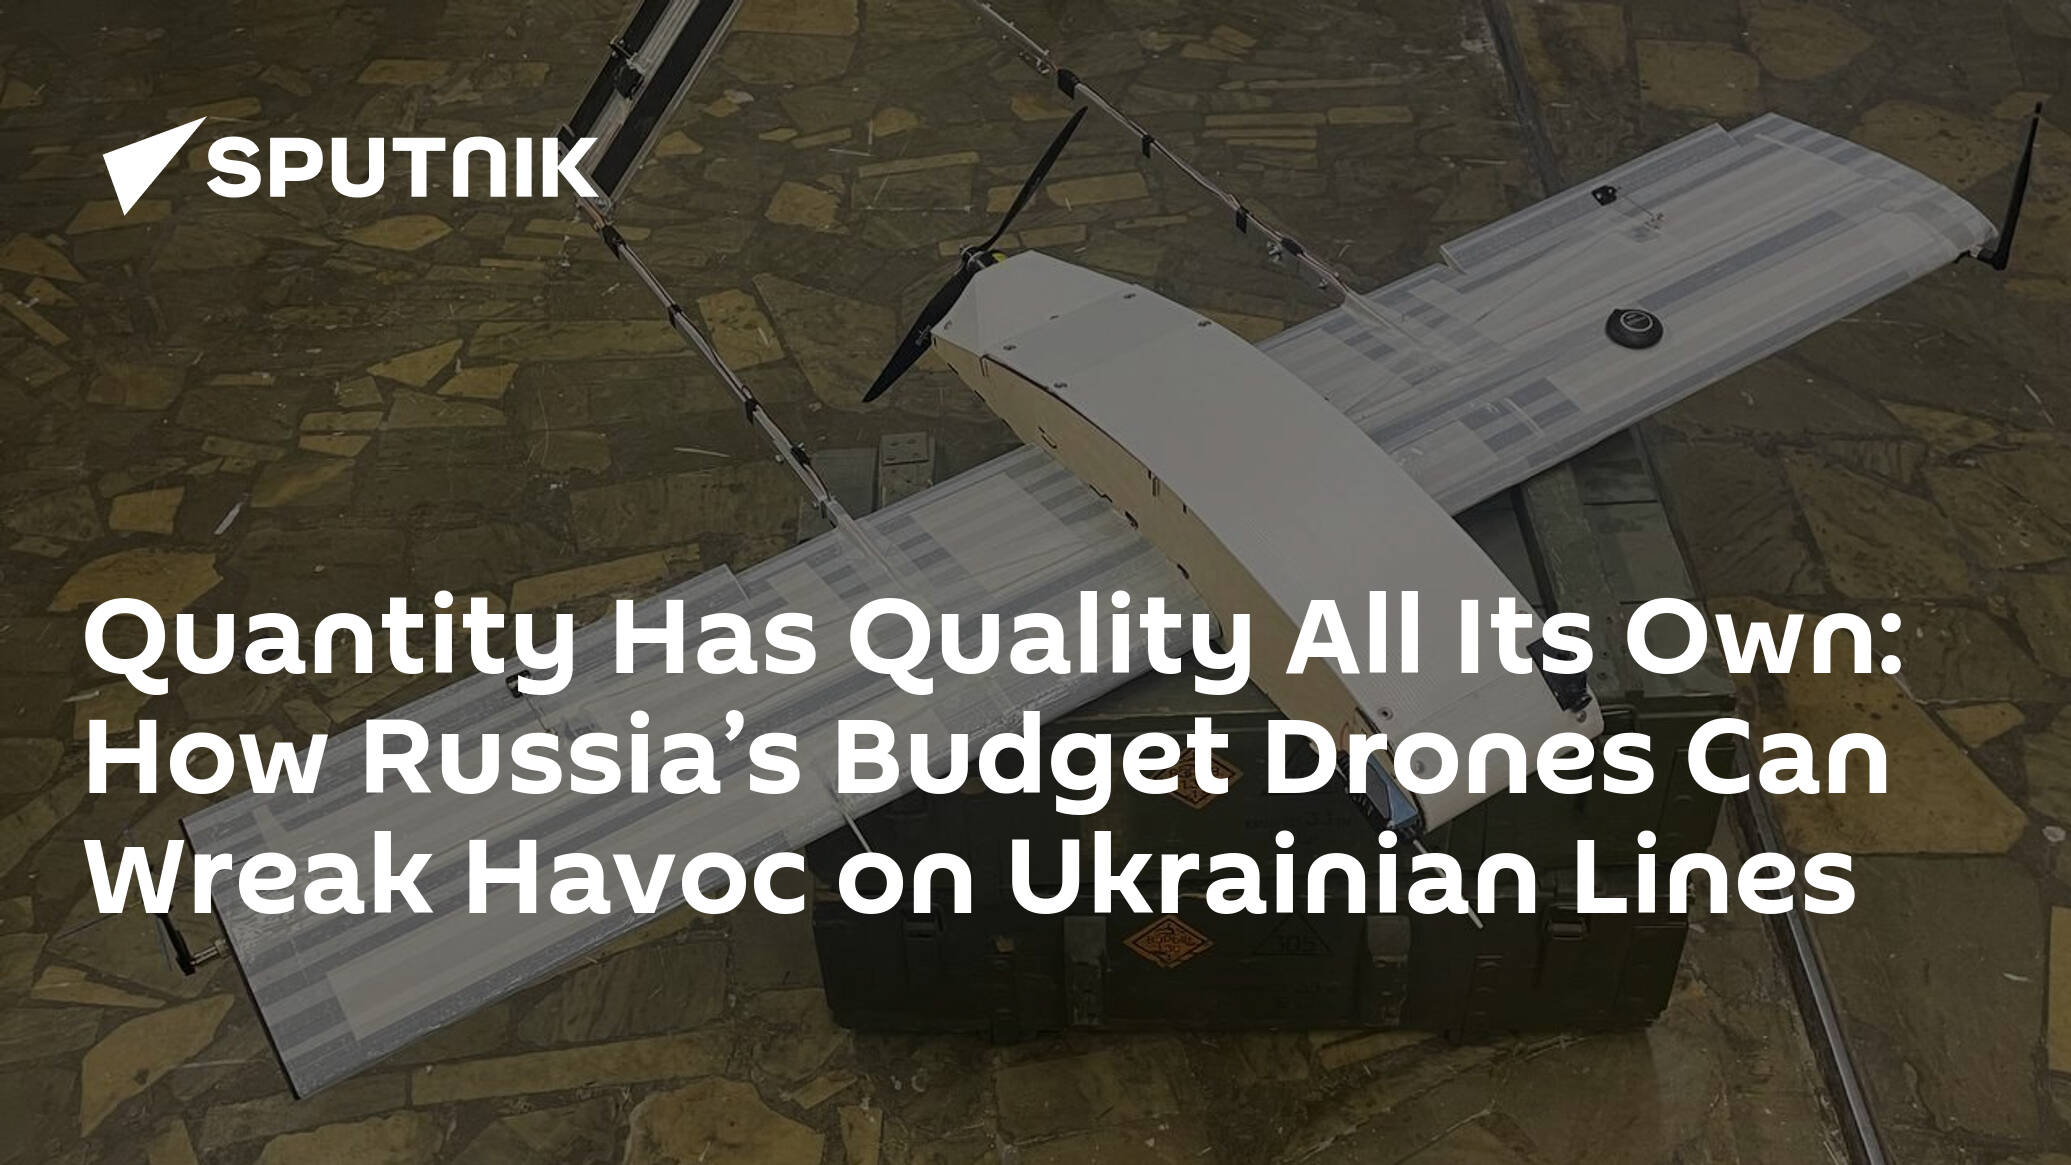 Quantity Has Quality All Its Own: How Russia’s Budget Drones Can Wreak Havoc on Ukrainian Lines